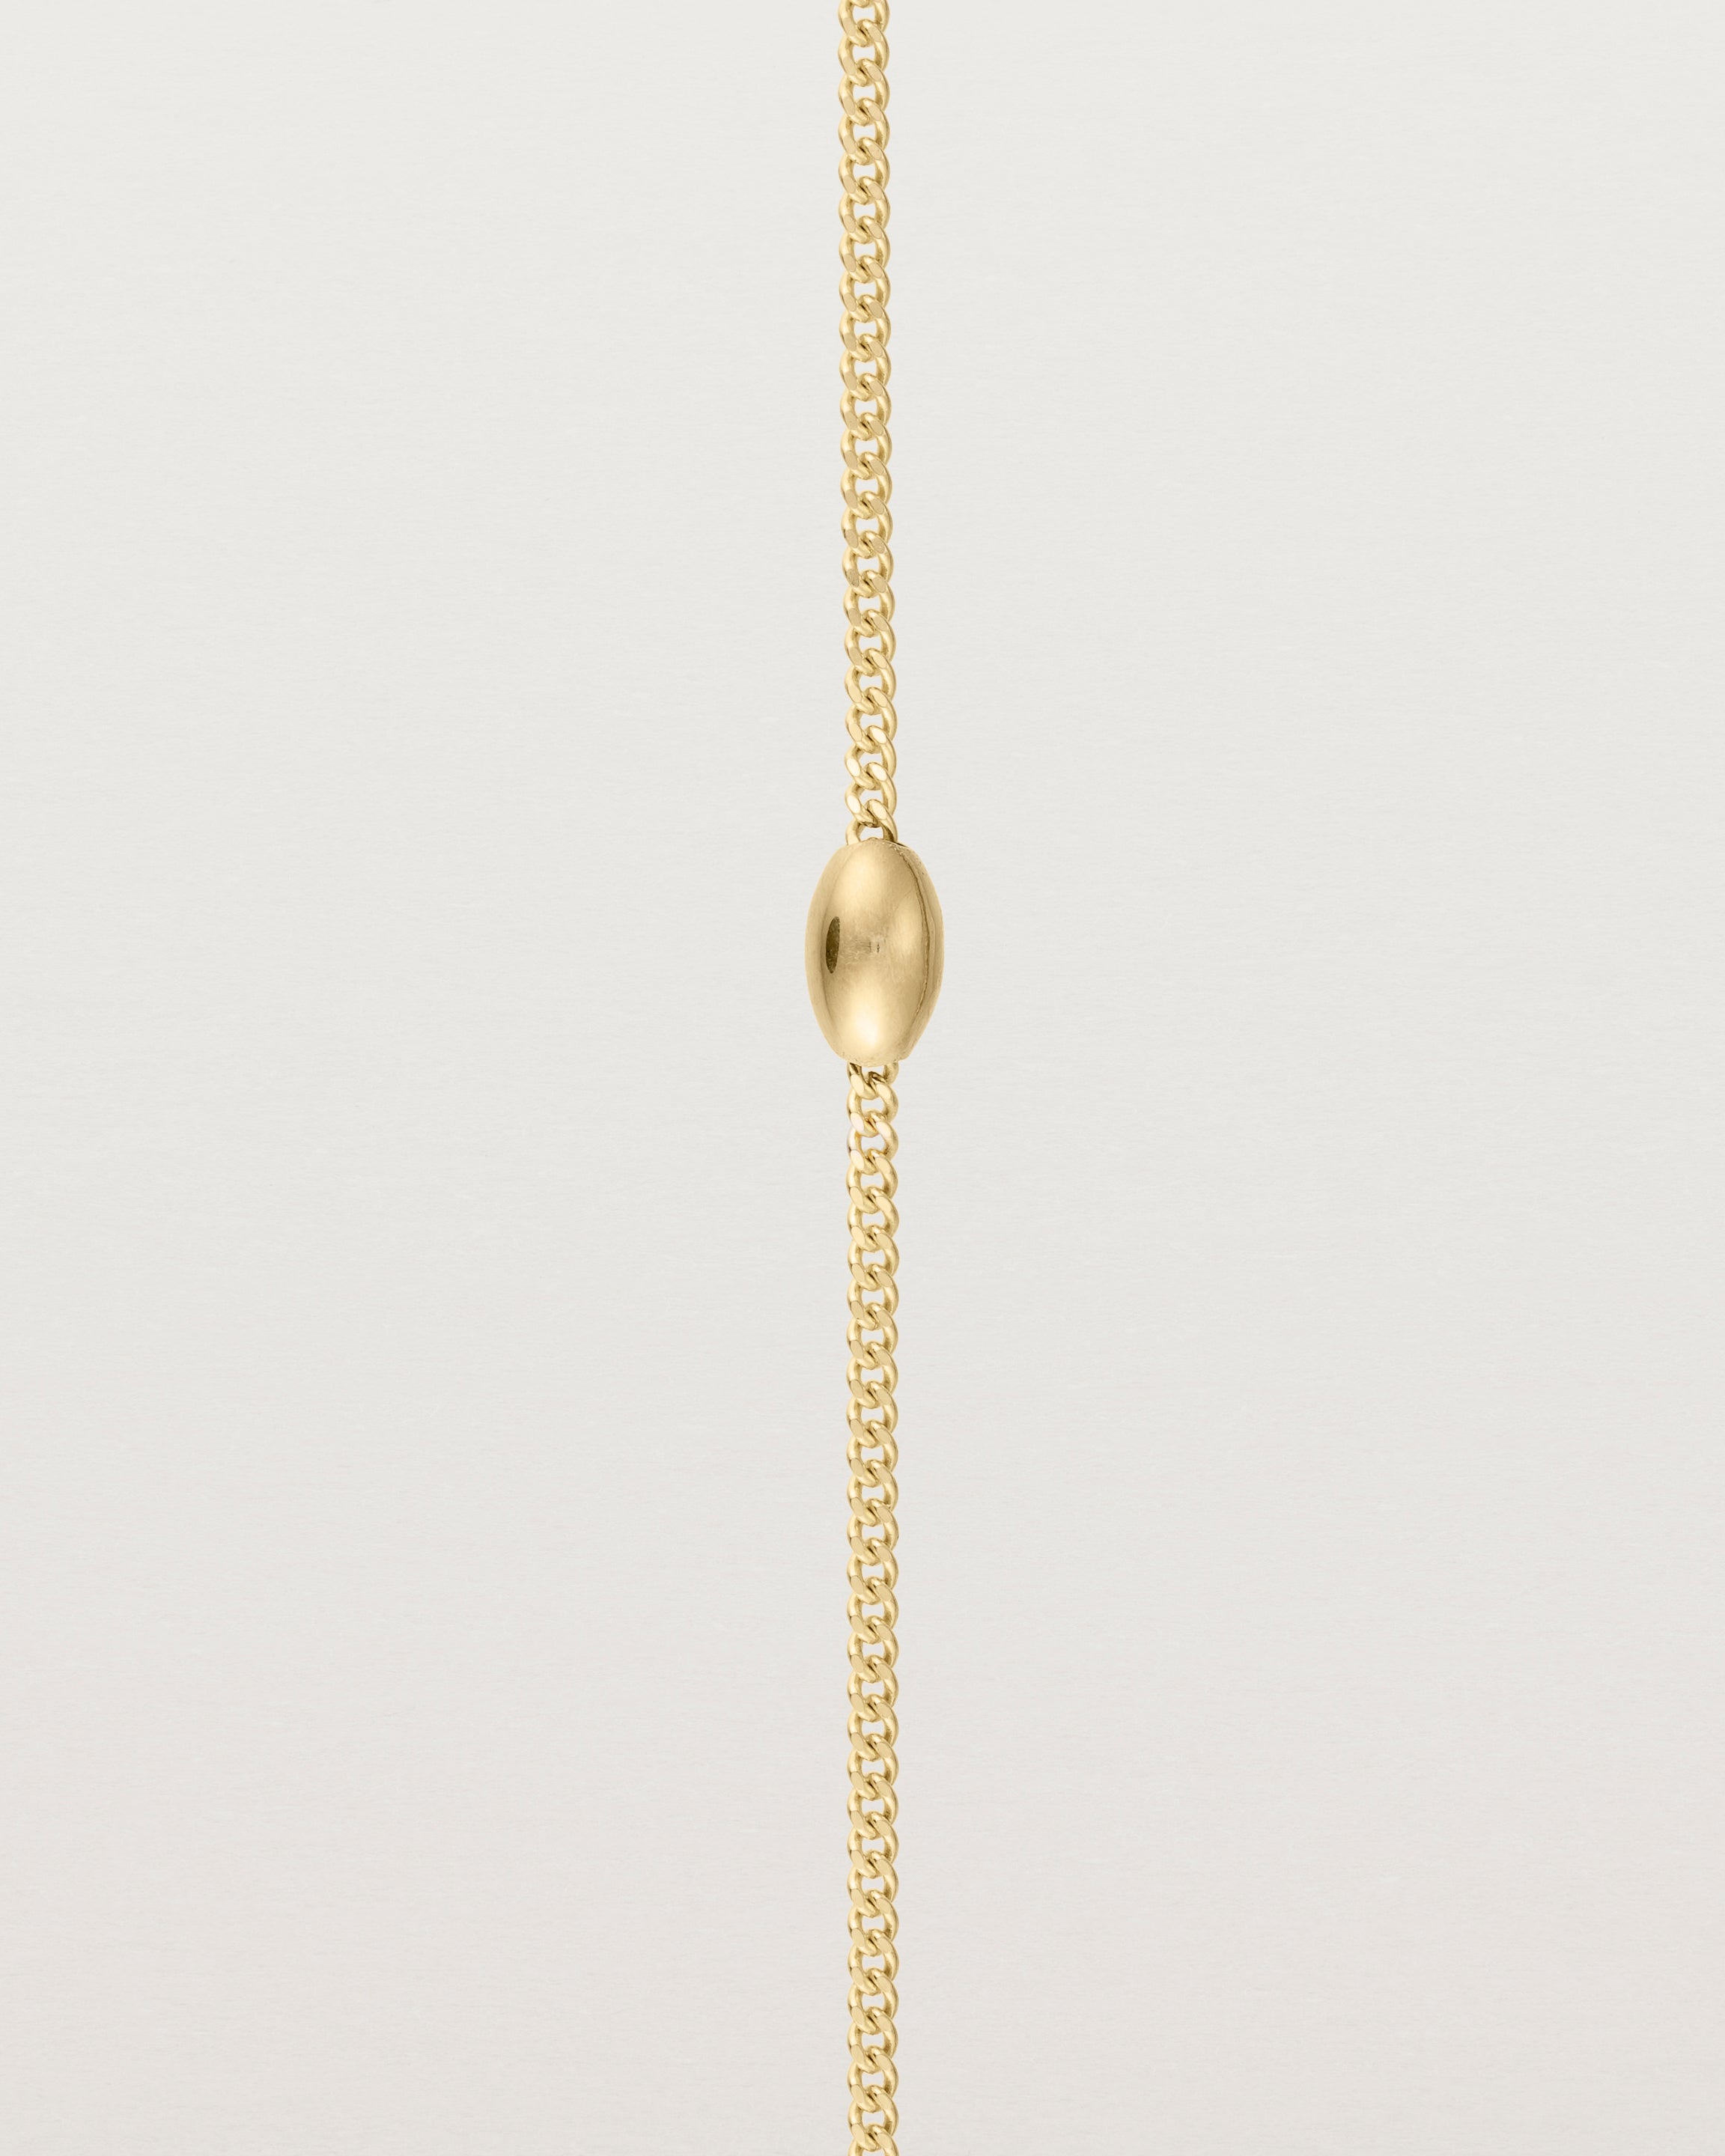 close up of Sonder bracelet in yellow gold showing one charm